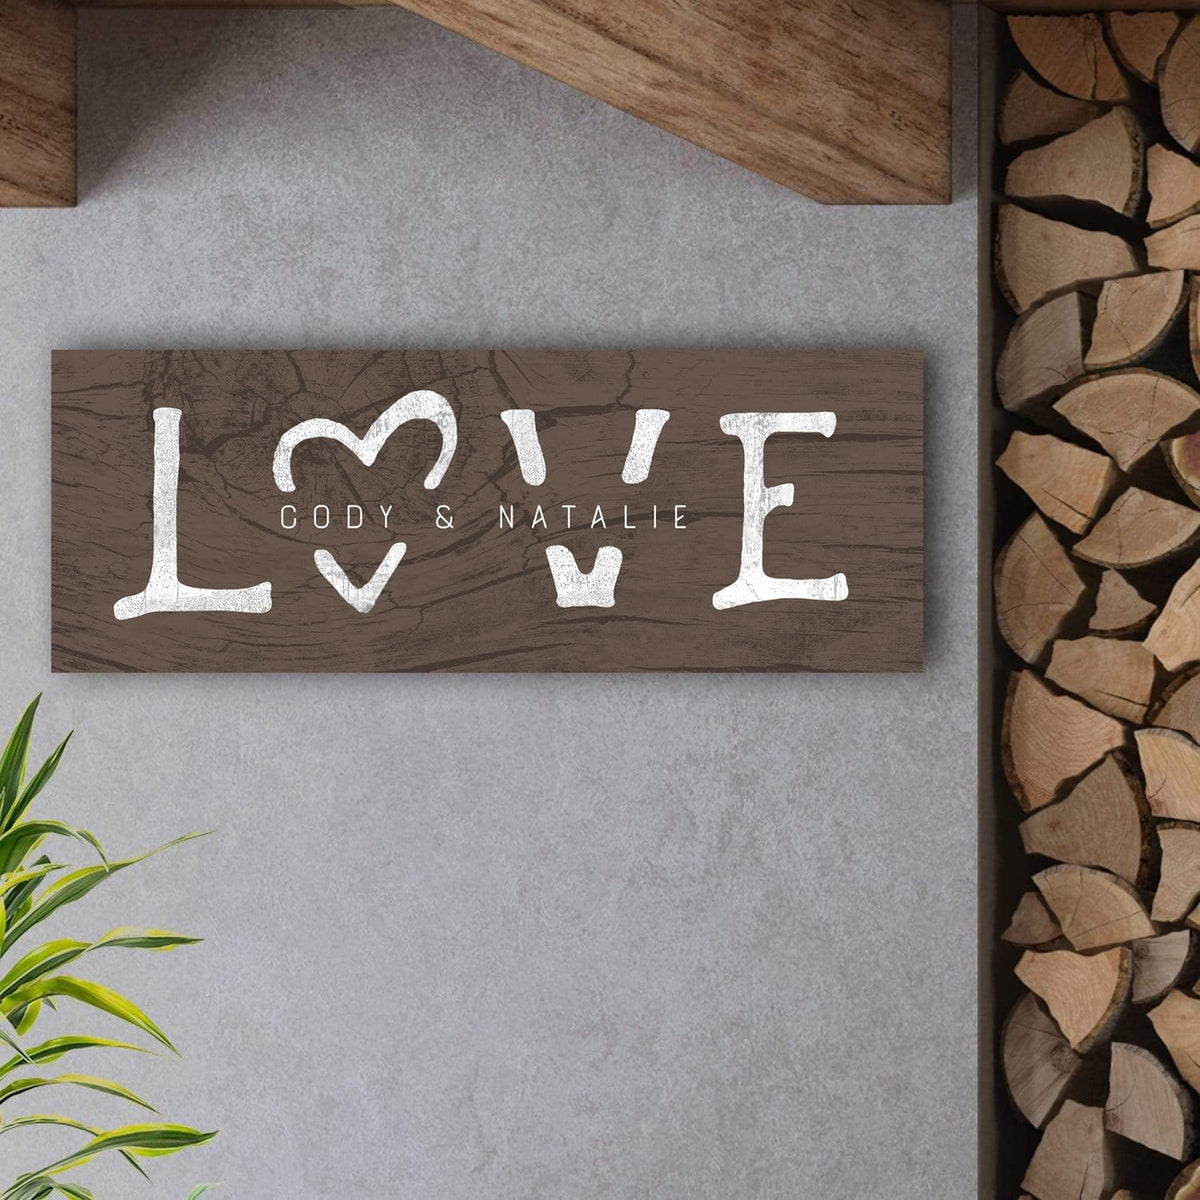 Rustic Wood finish of personalized LOVE romantic art decor including yours and your family names